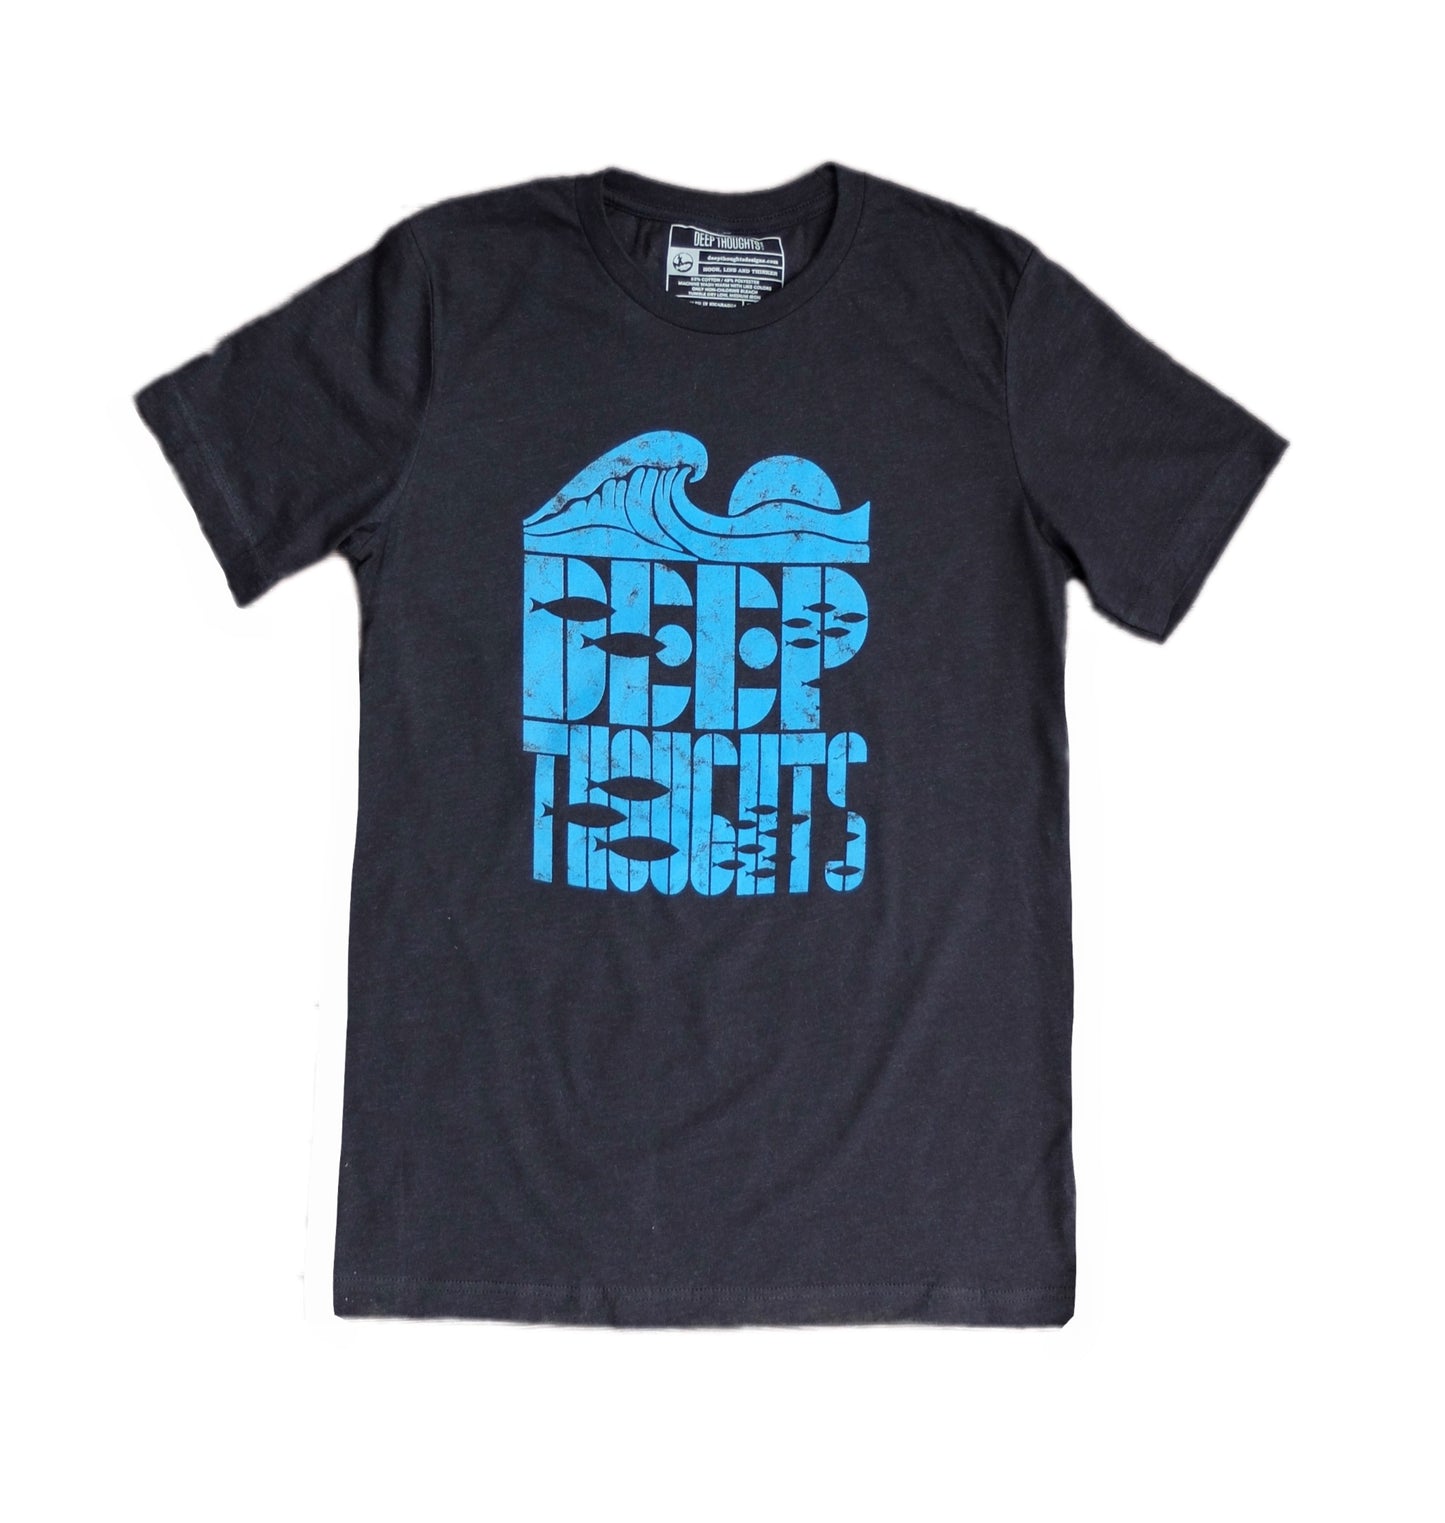 black t-shirt with bright blue cresting wave graphic over 'Deep Thoughts' text with fish silhouettes